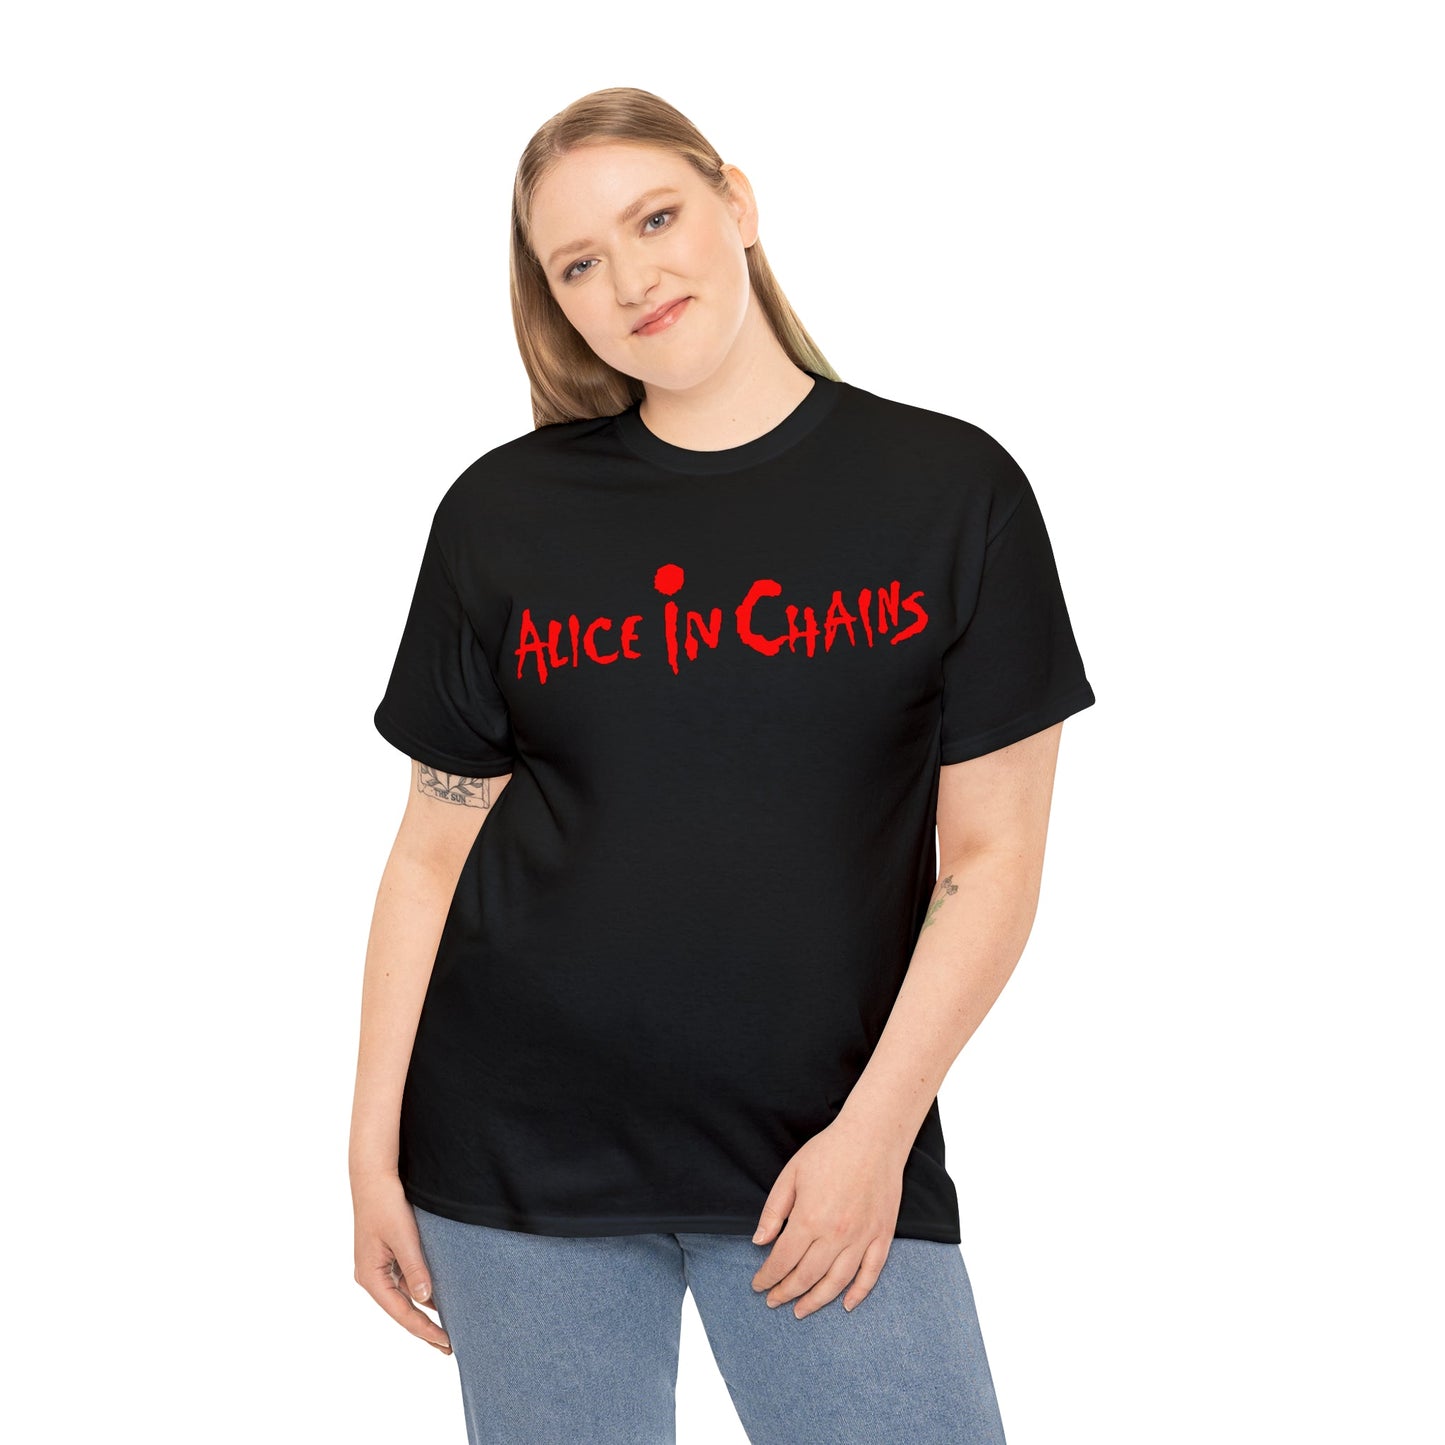 Alice In Chains 90s Black T-Shirt - RetroTeeShop